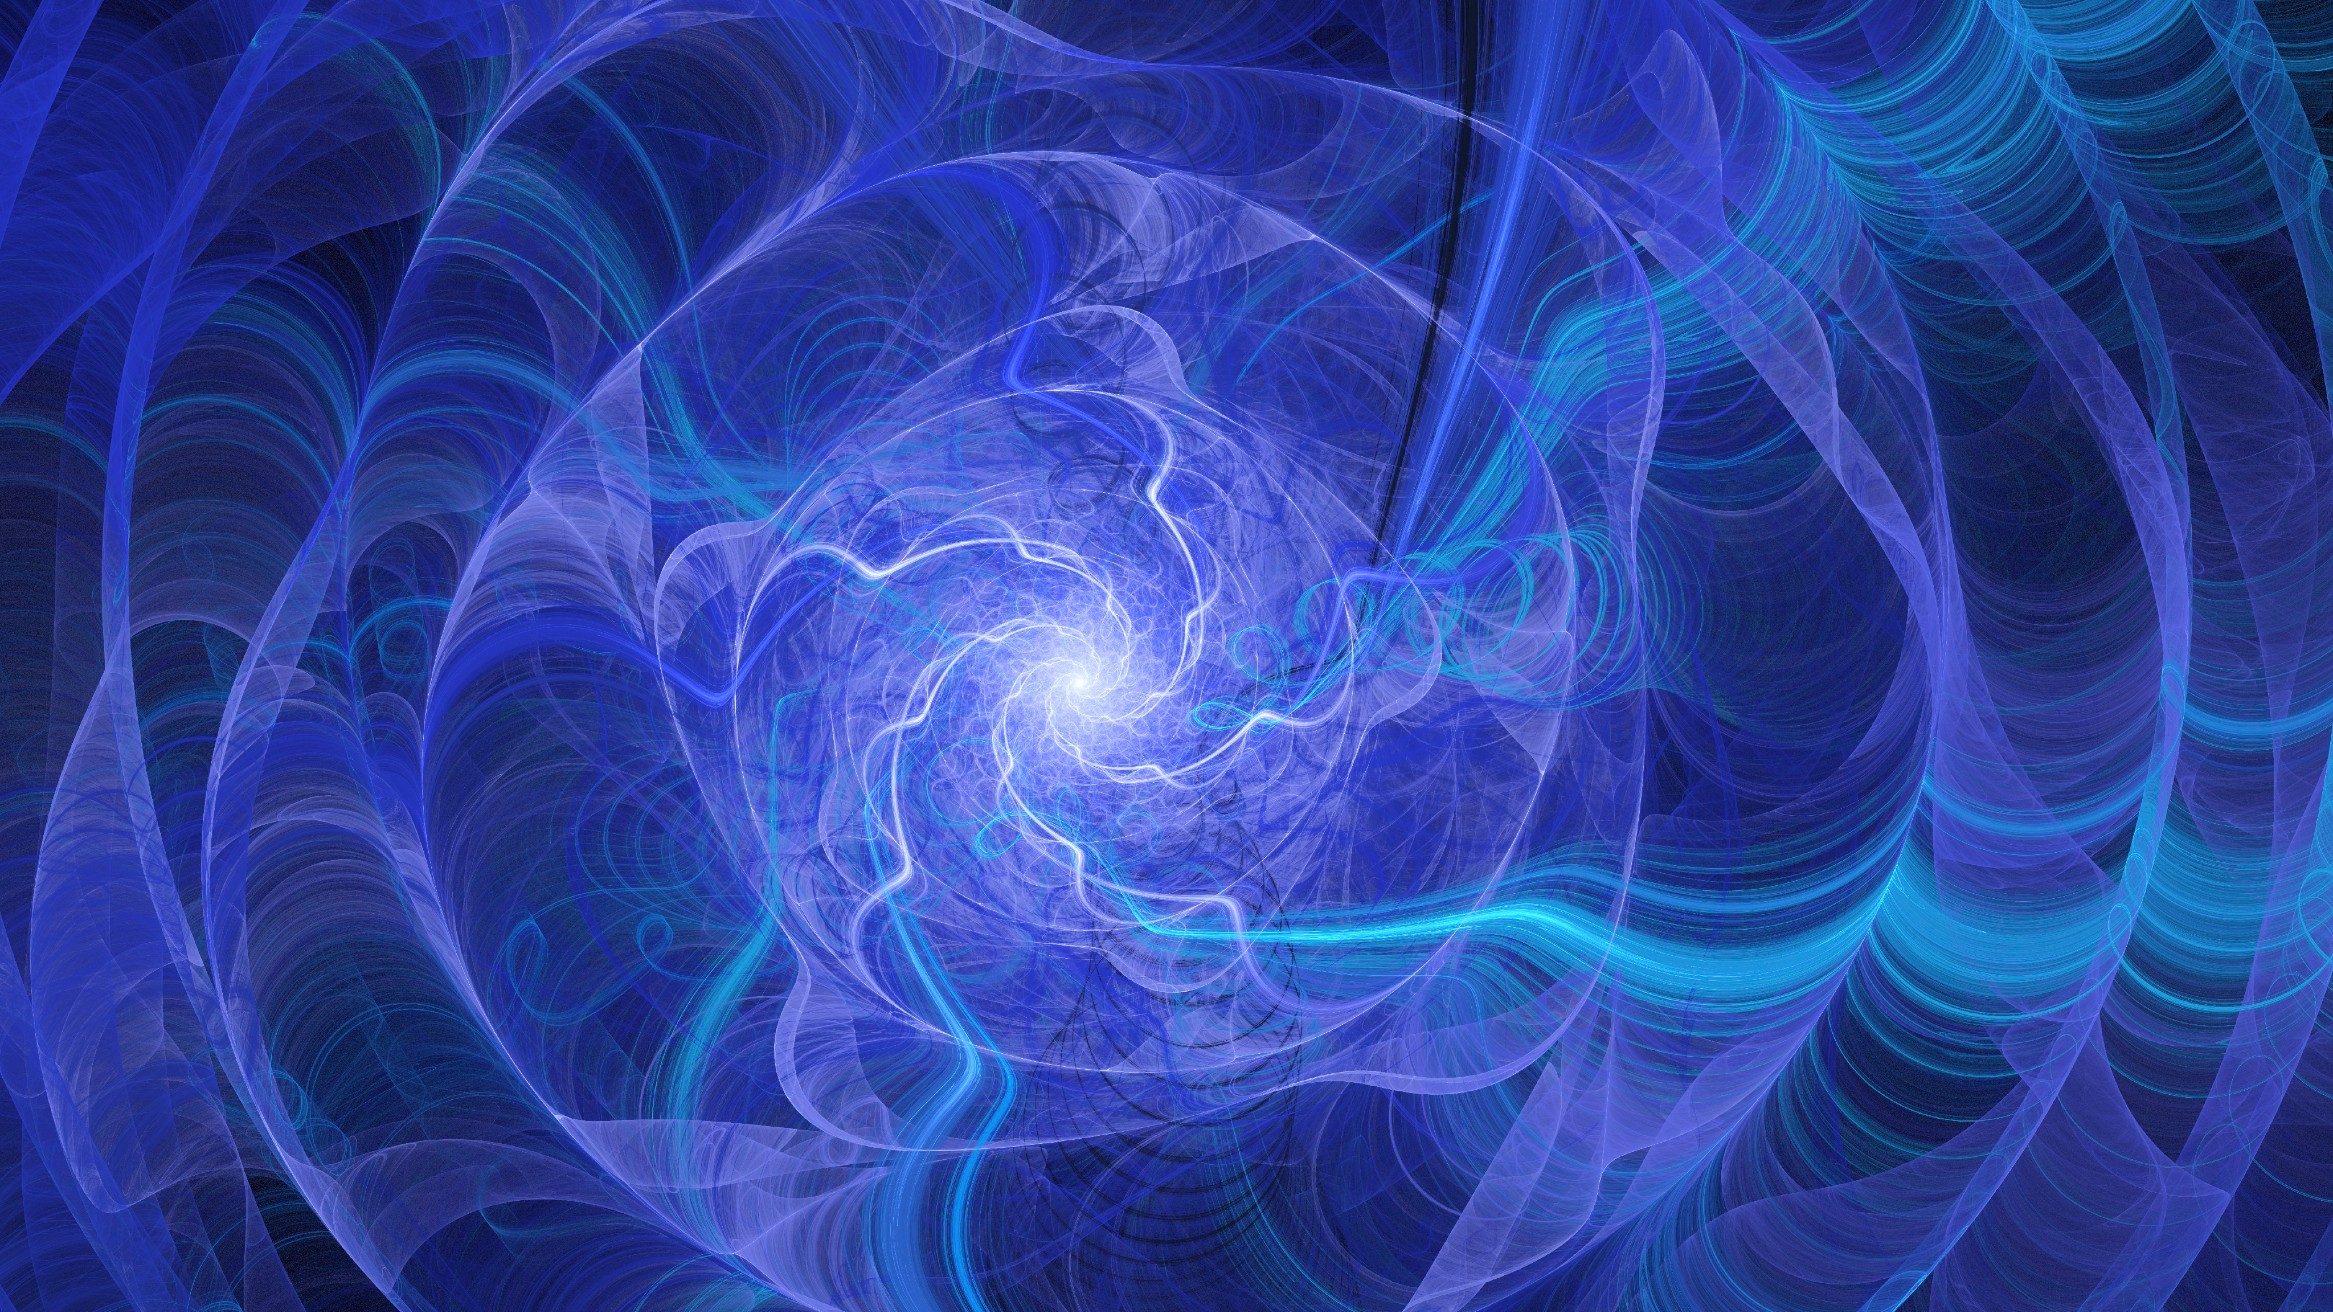 Blue and purple circular swirls of light which are distorted as they expand from the bright centre to conceptually illustrate string theory